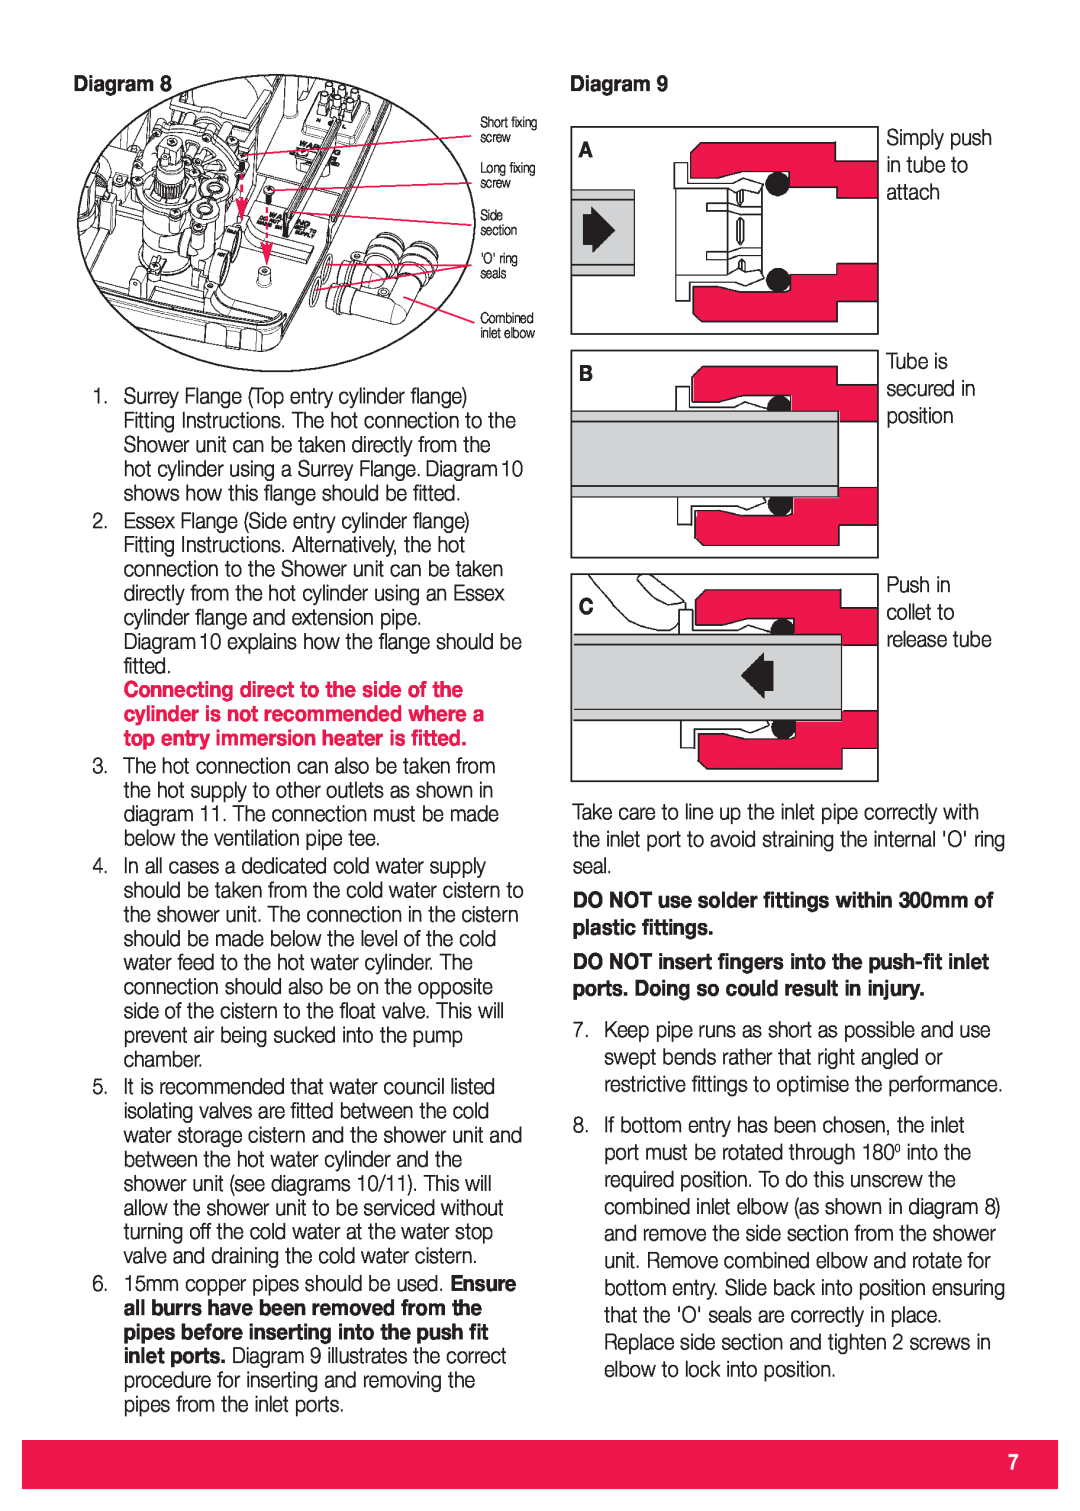 Redring 520M, 520TS installation instructions Diagram, in tube to, attach, Tube is, position, Push in, collet to 